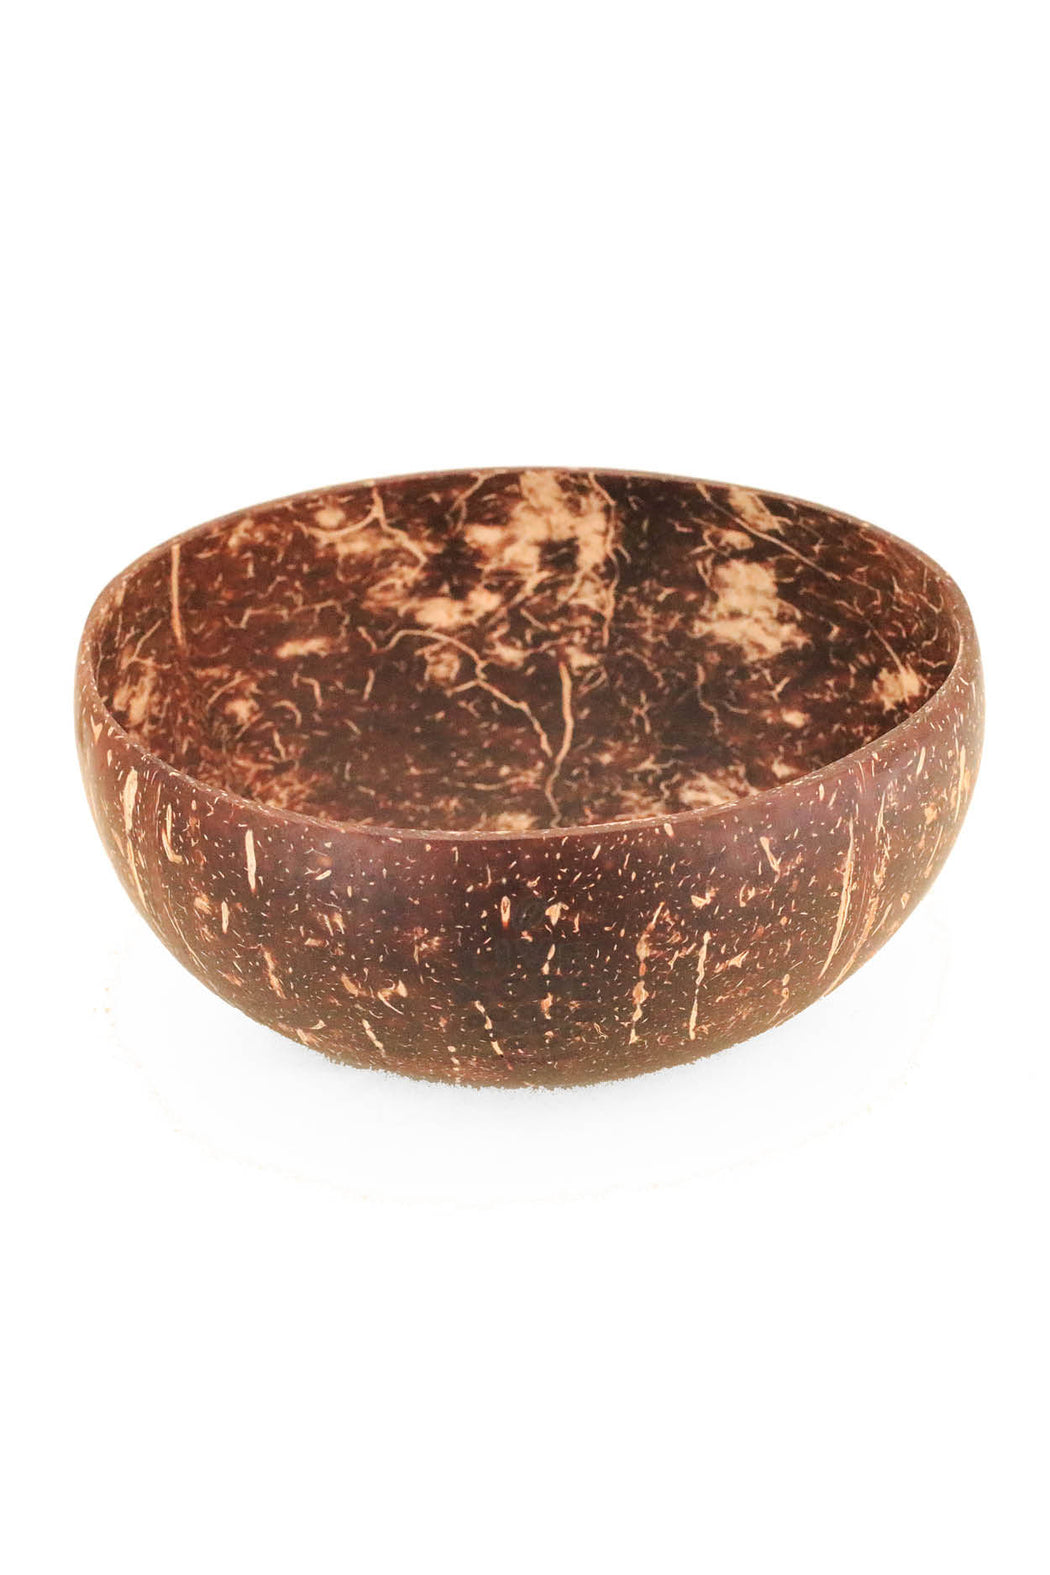 Handcrafted Coconut Bowl